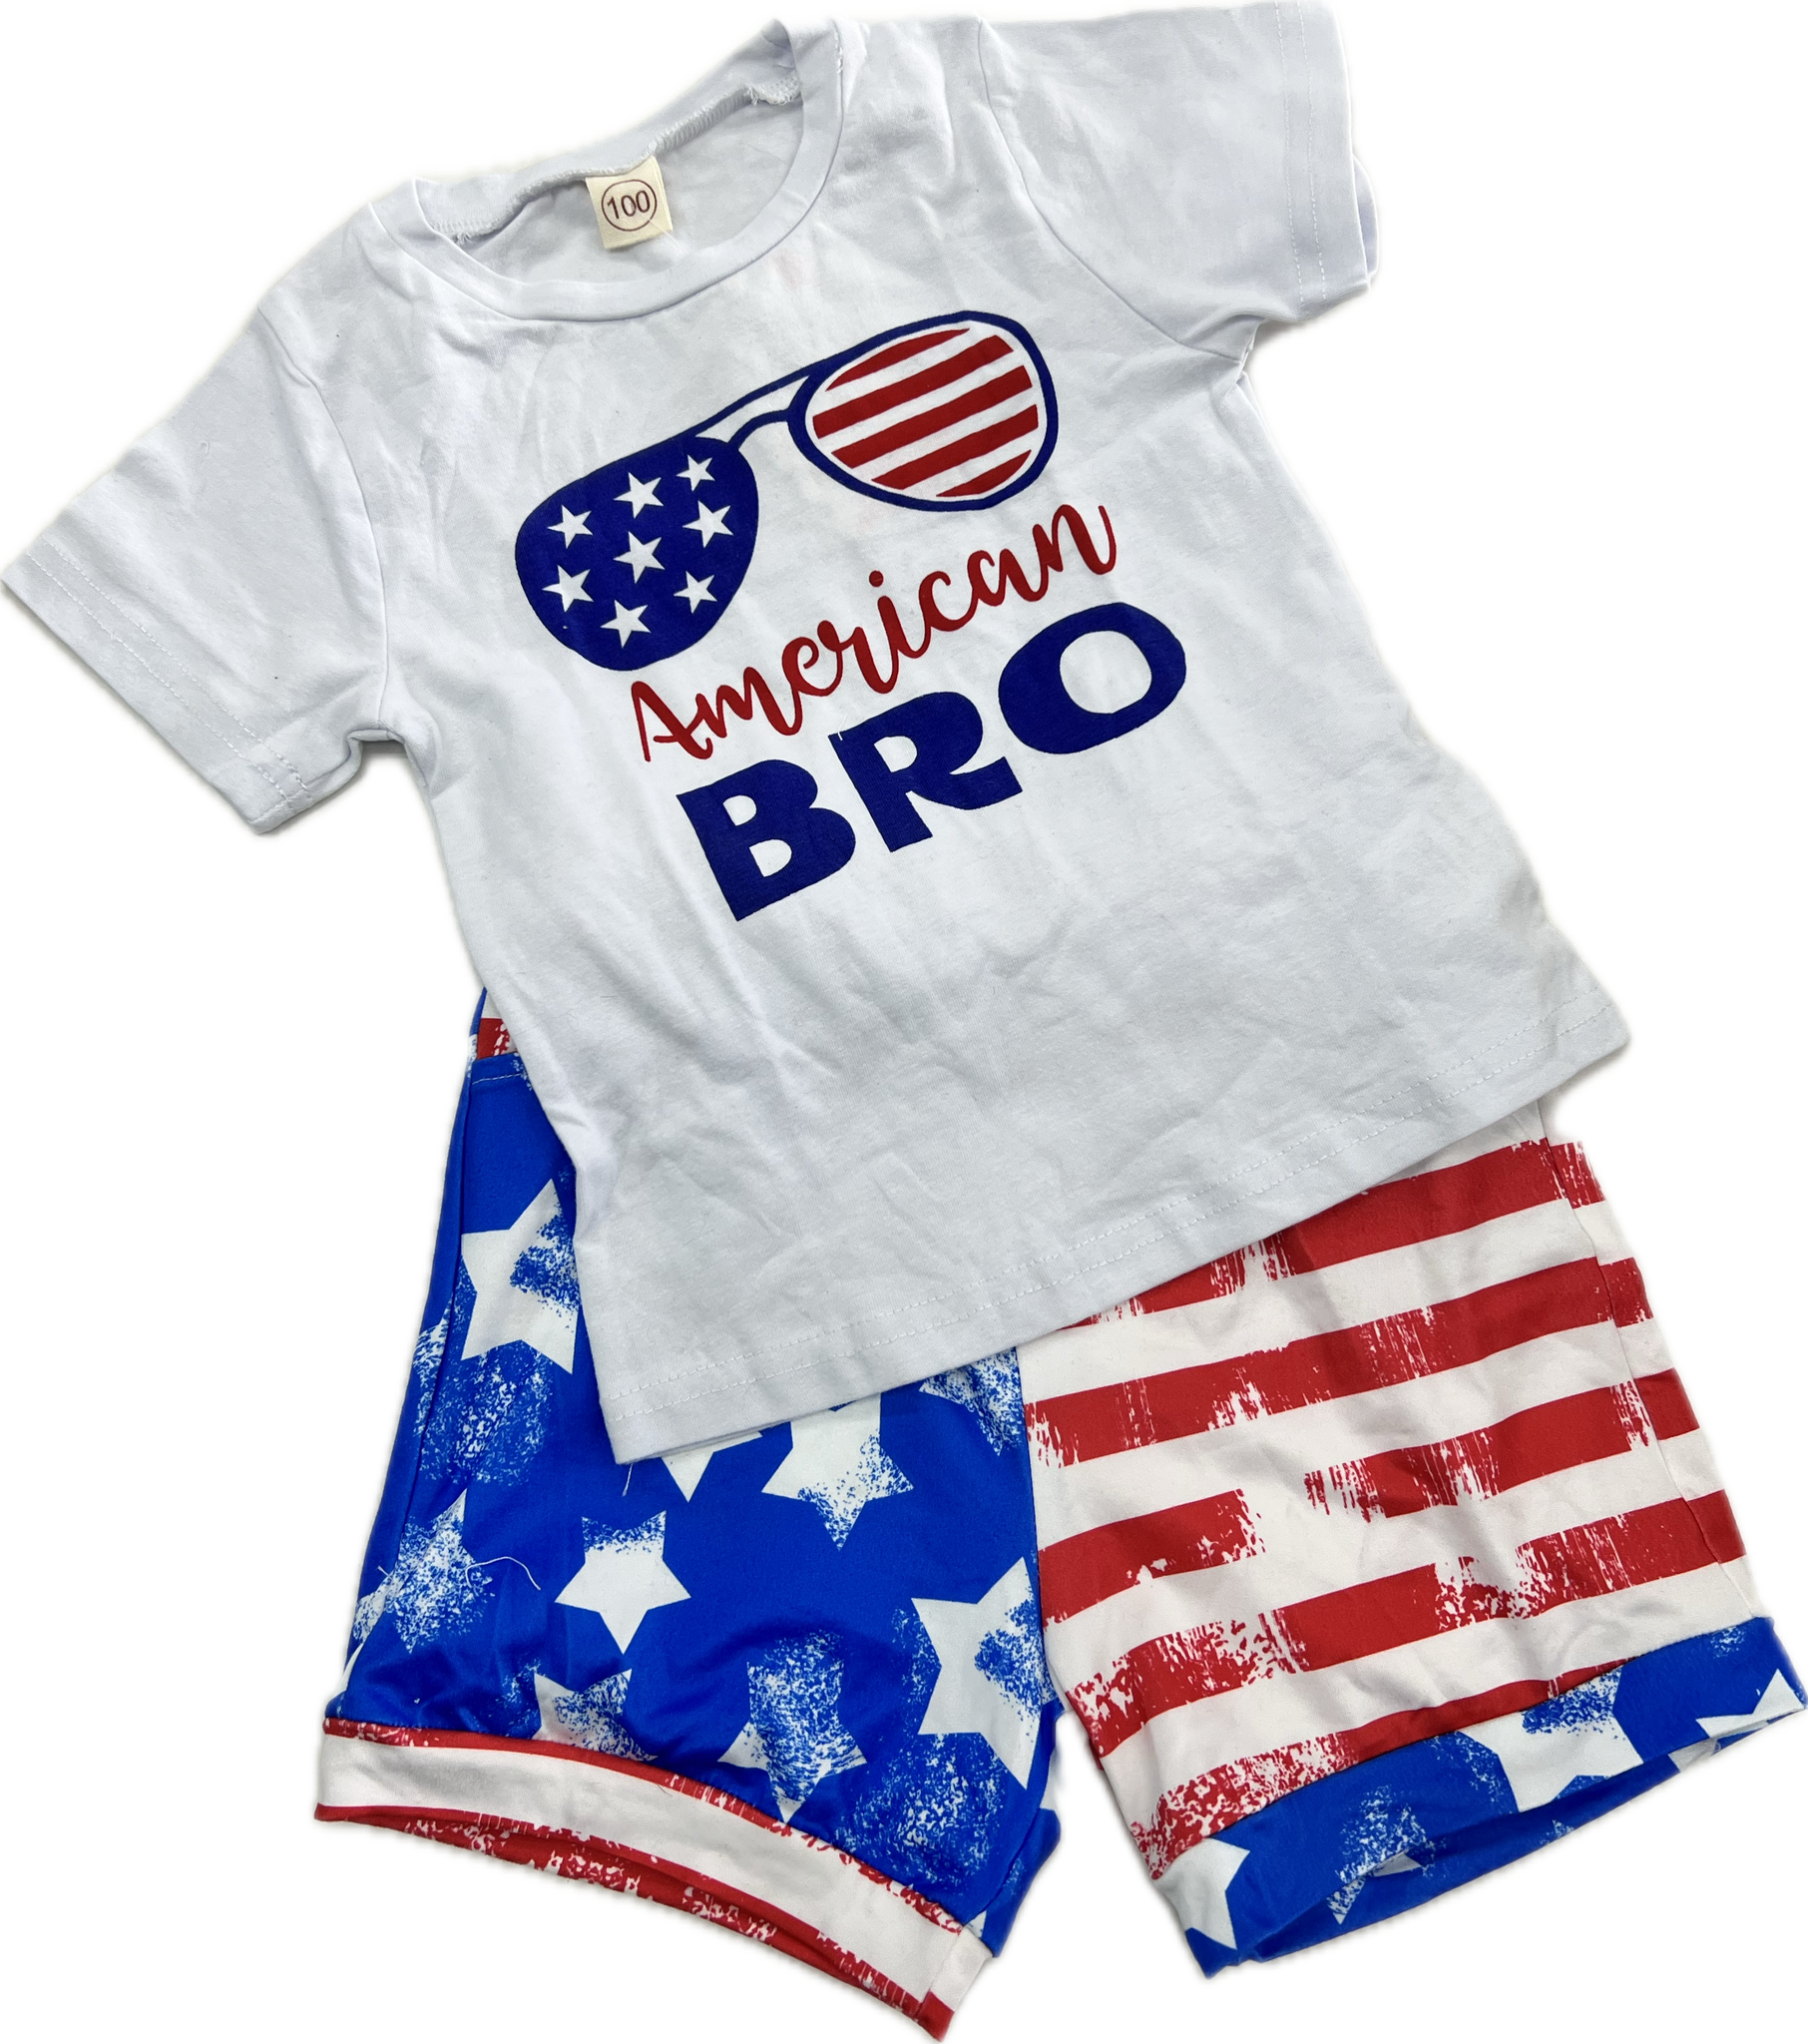 Boys Toddler 3T Patriotic 2 Piece Outfit